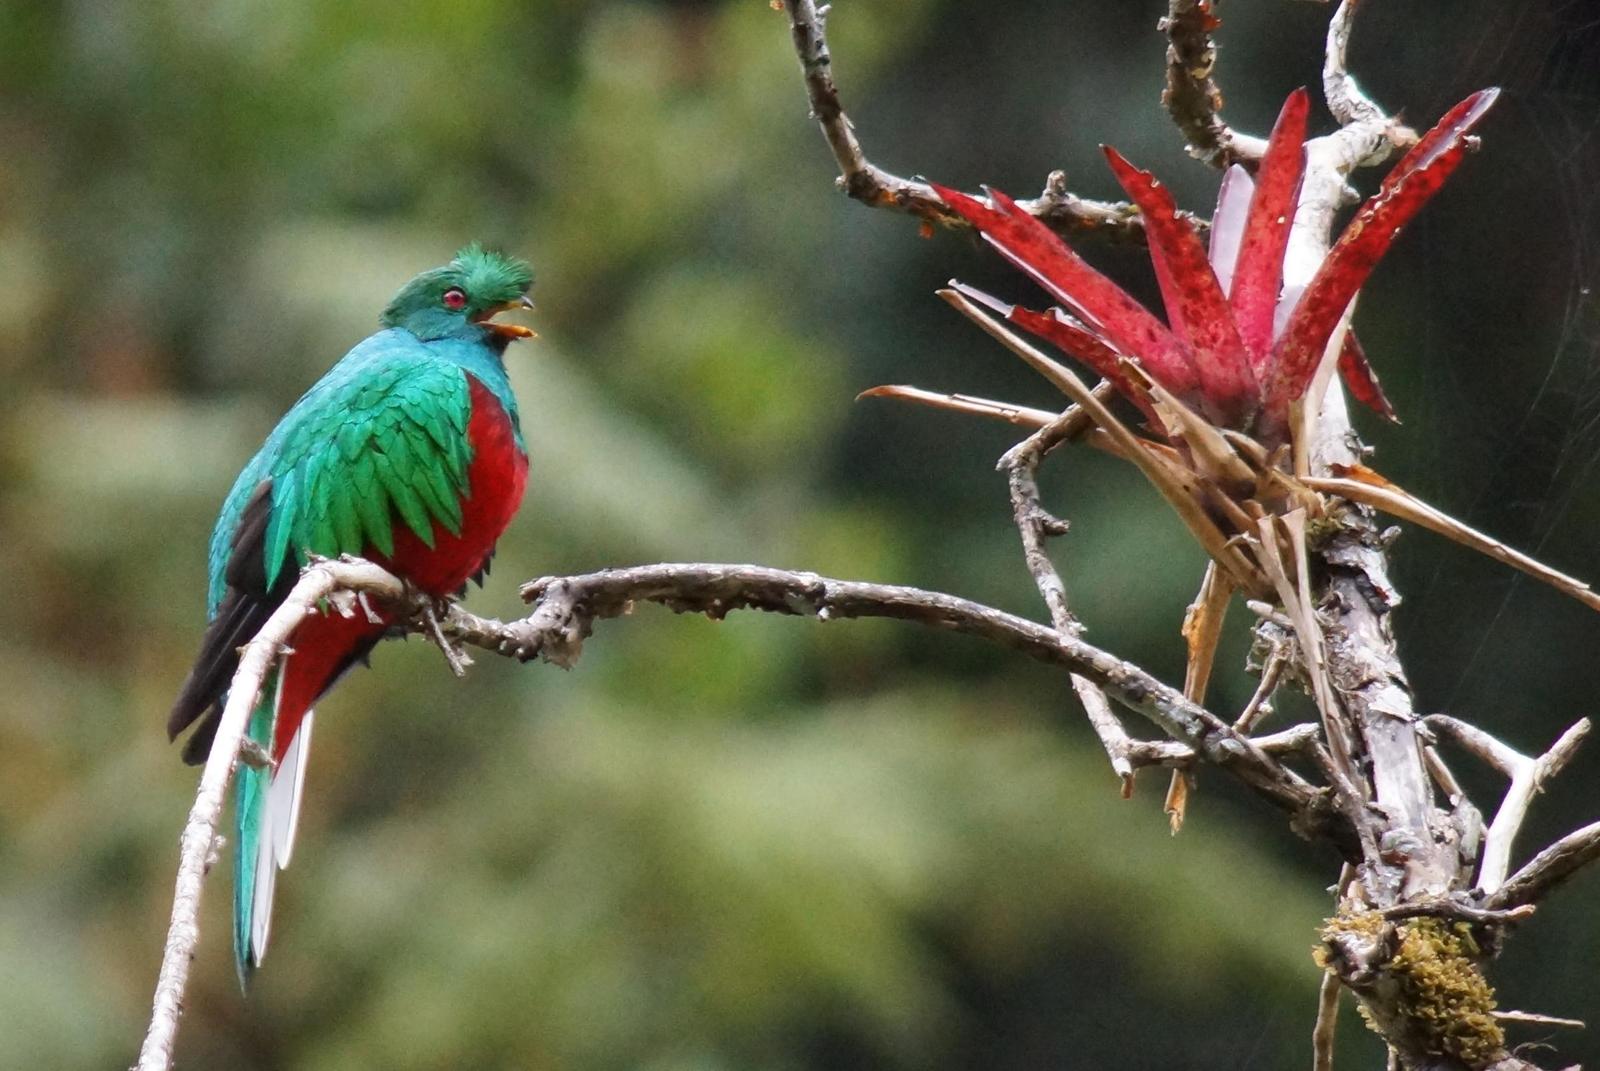 Crested Quetzal Photo by Robin Oxley